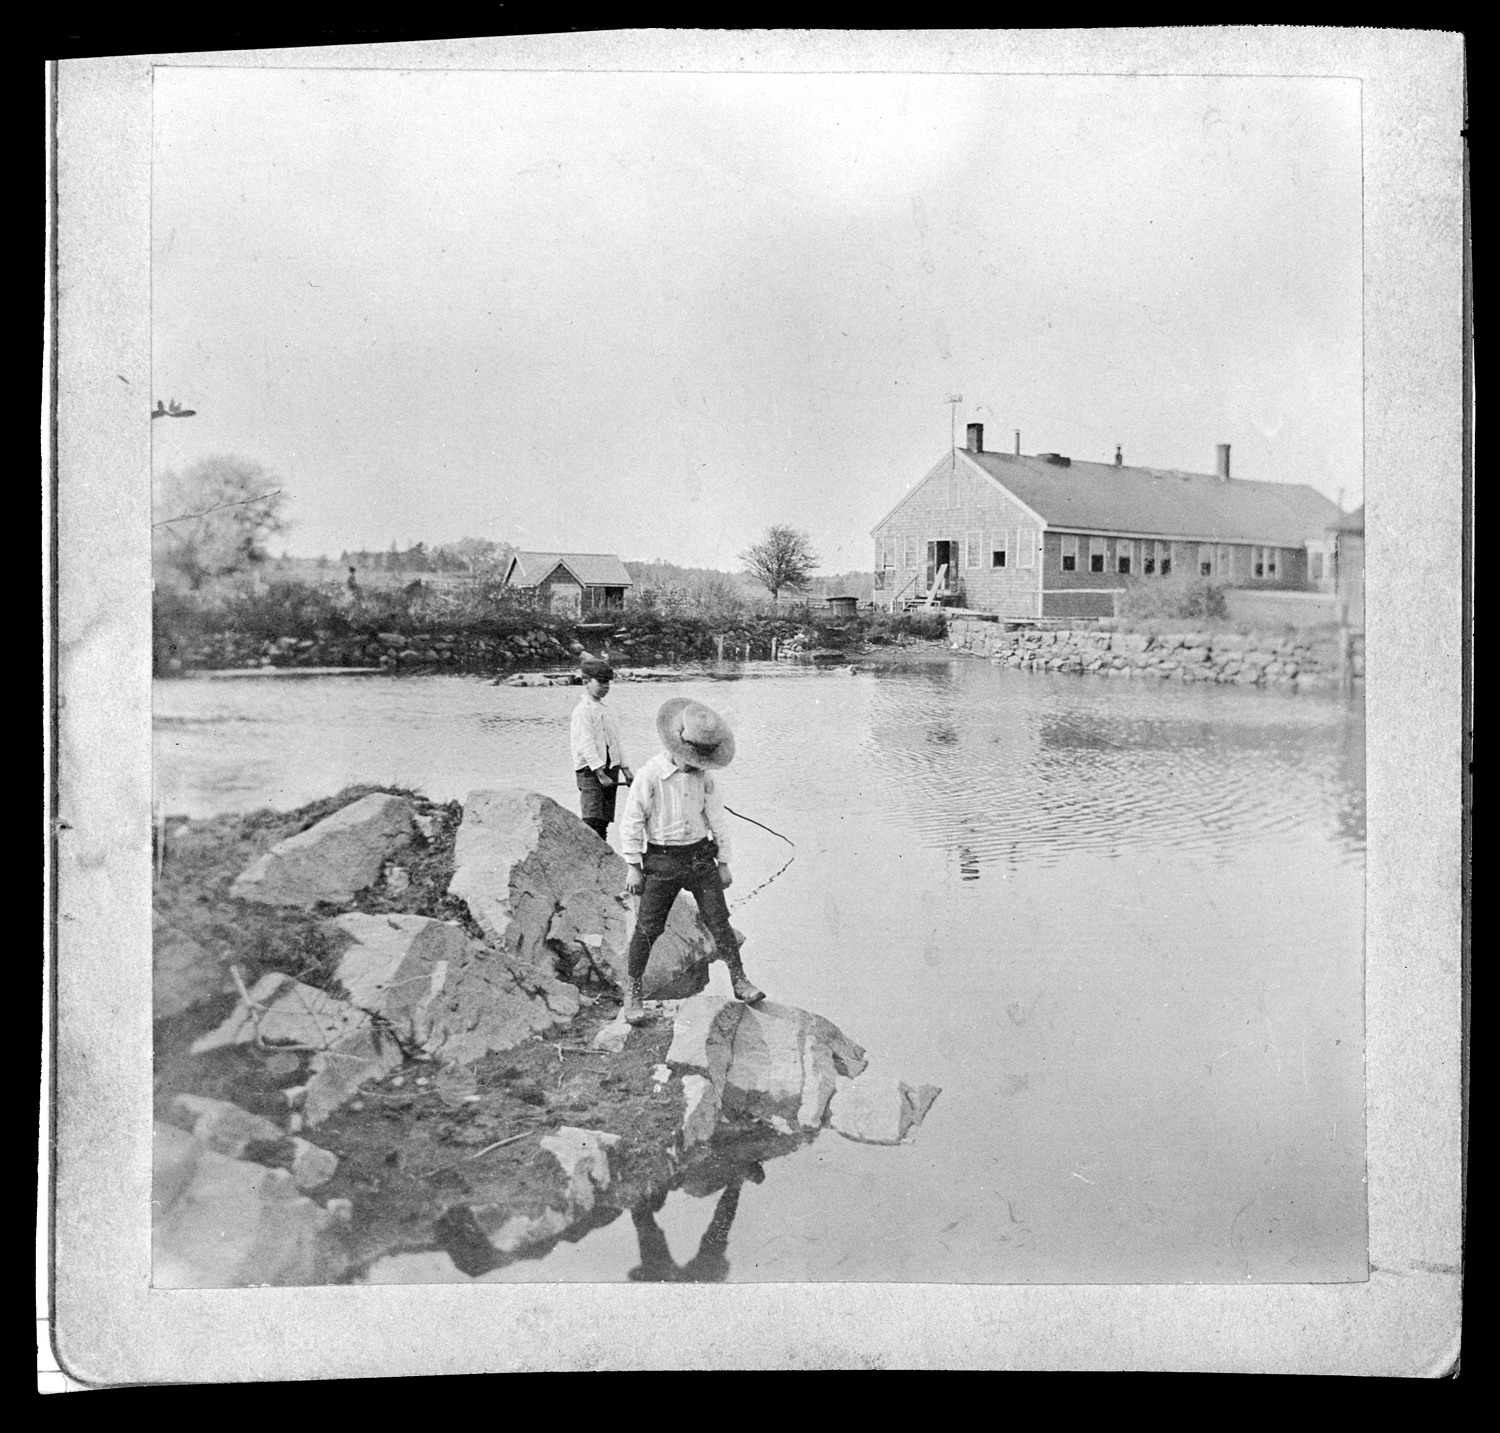 Two boys fishing in the millpond of C. Drew & Co., no date